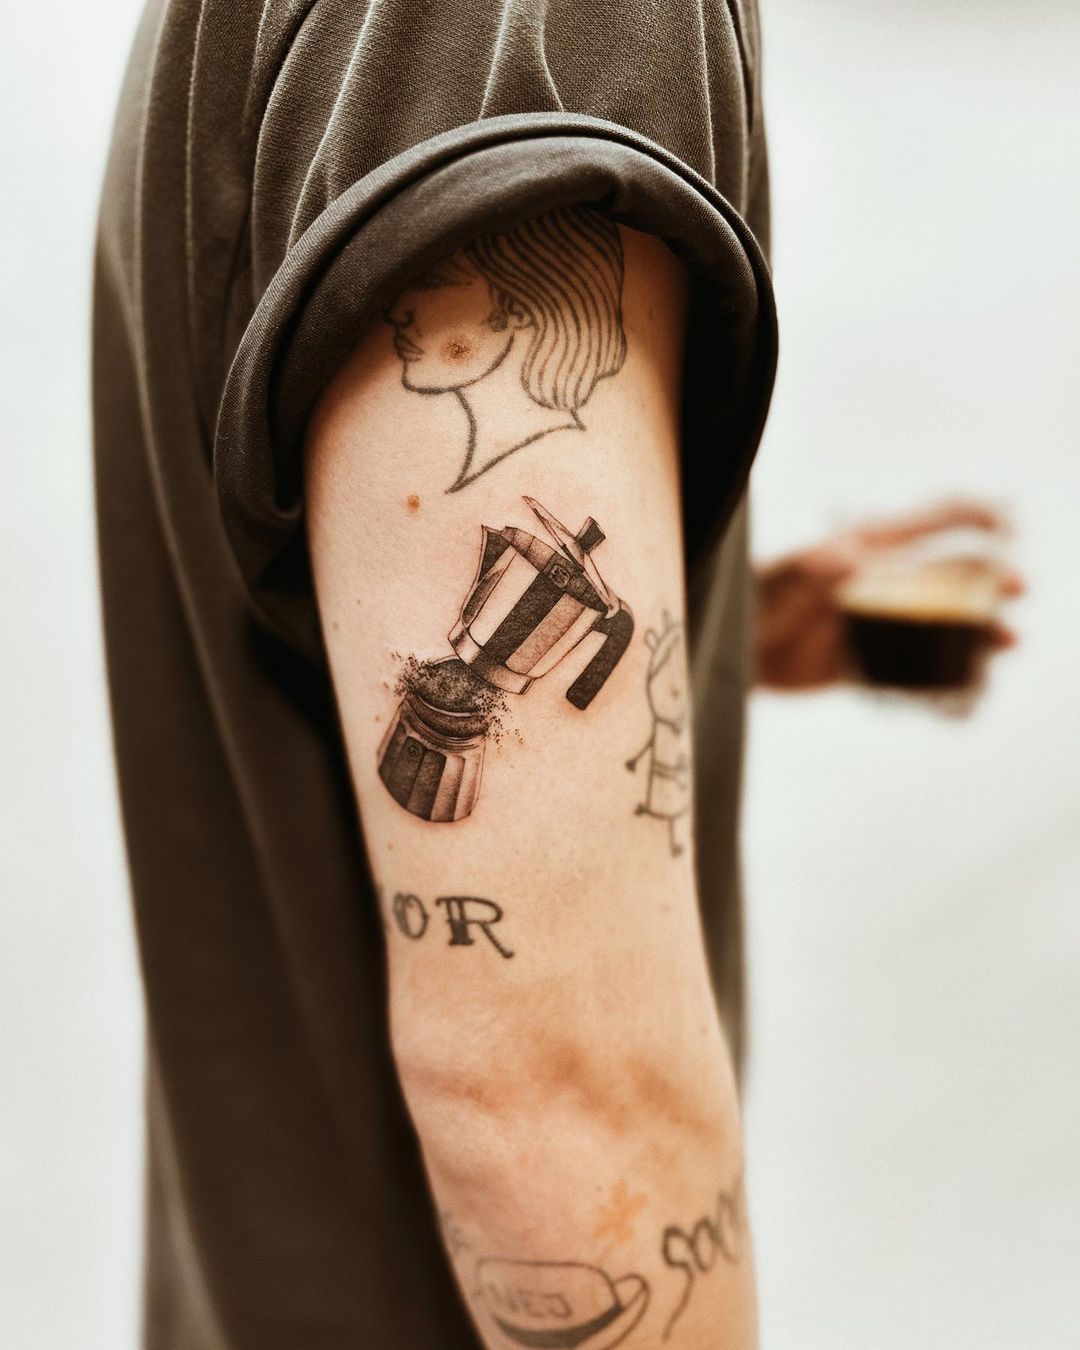 Bean Ink: Why Coffee And Tattoos Just Might Be The Perfect Pairing |  Sprudge Coffee